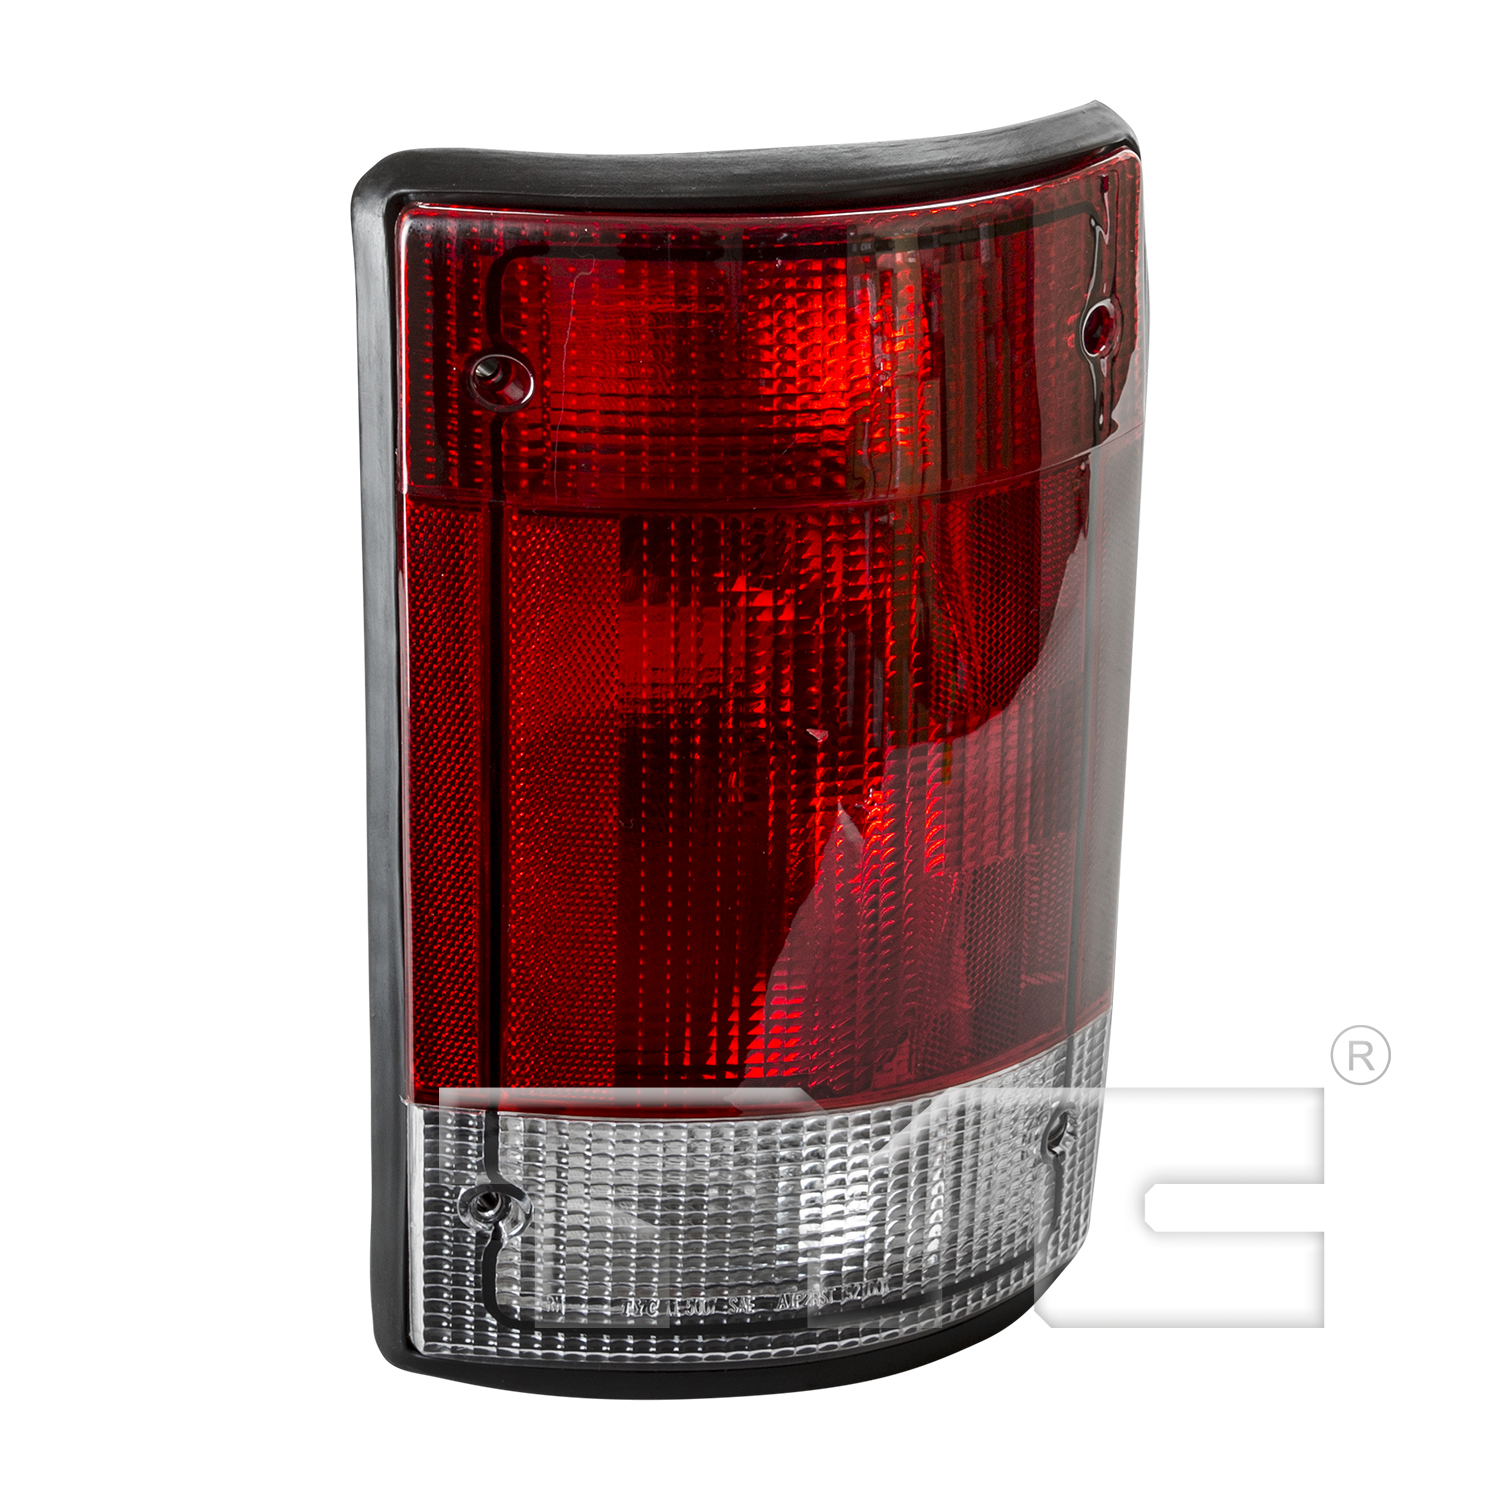 Aftermarket TAILLIGHTS for FORD - E-450 SUPER DUTY, E-450 SUPER DUTY,04-14,RT Taillamp assy